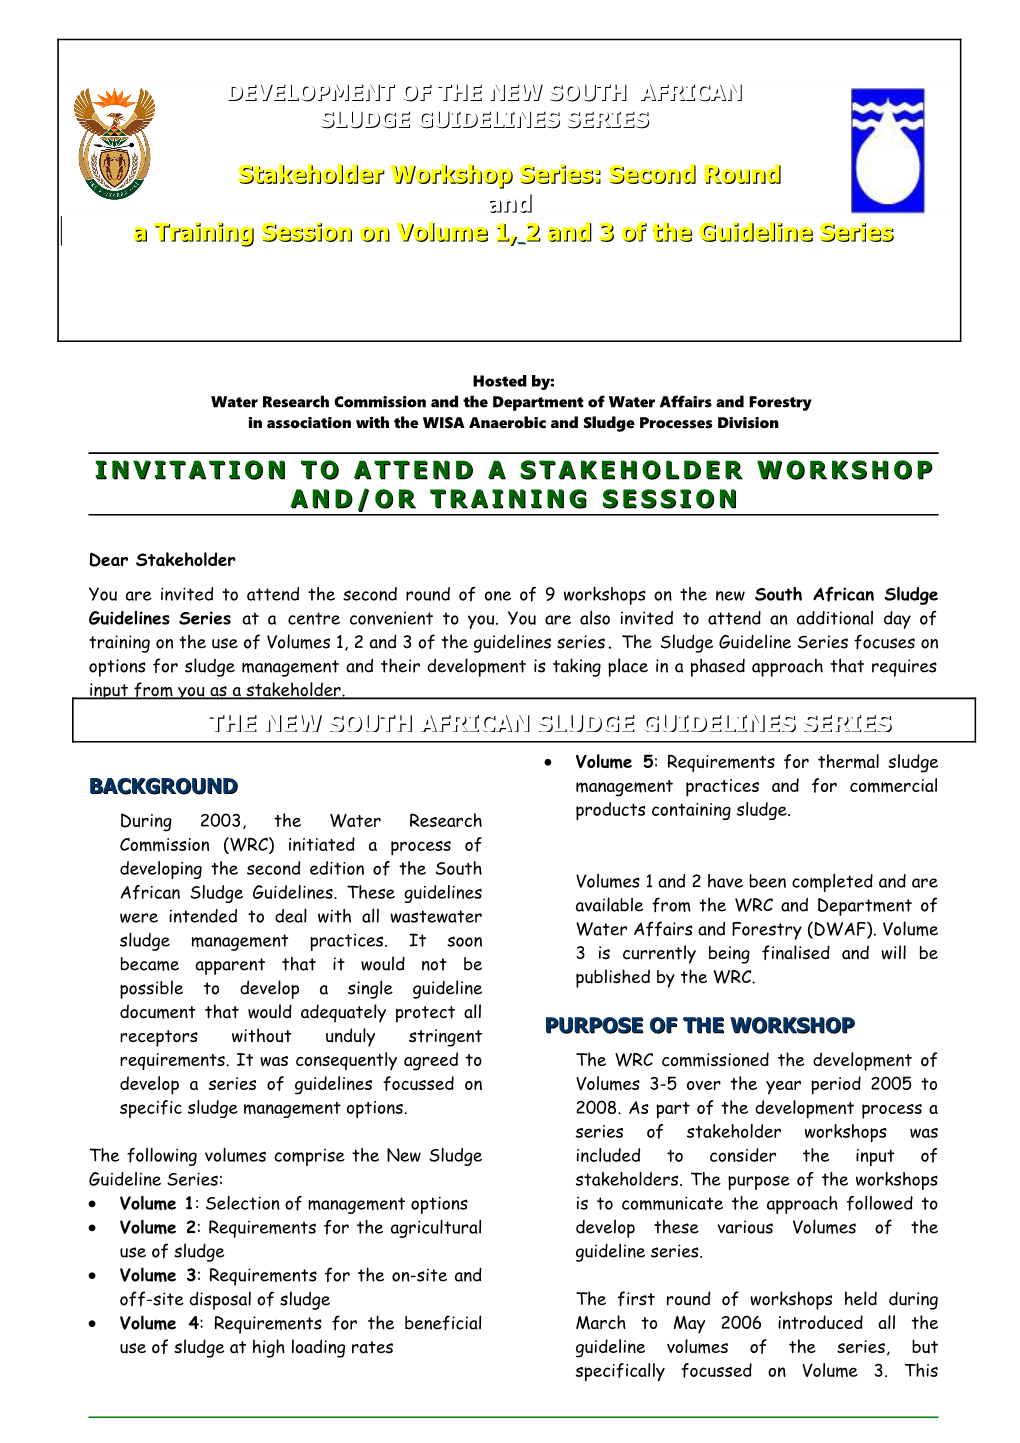 Invitation to a Workshop: the Development of the New South African Sludge Guidelines